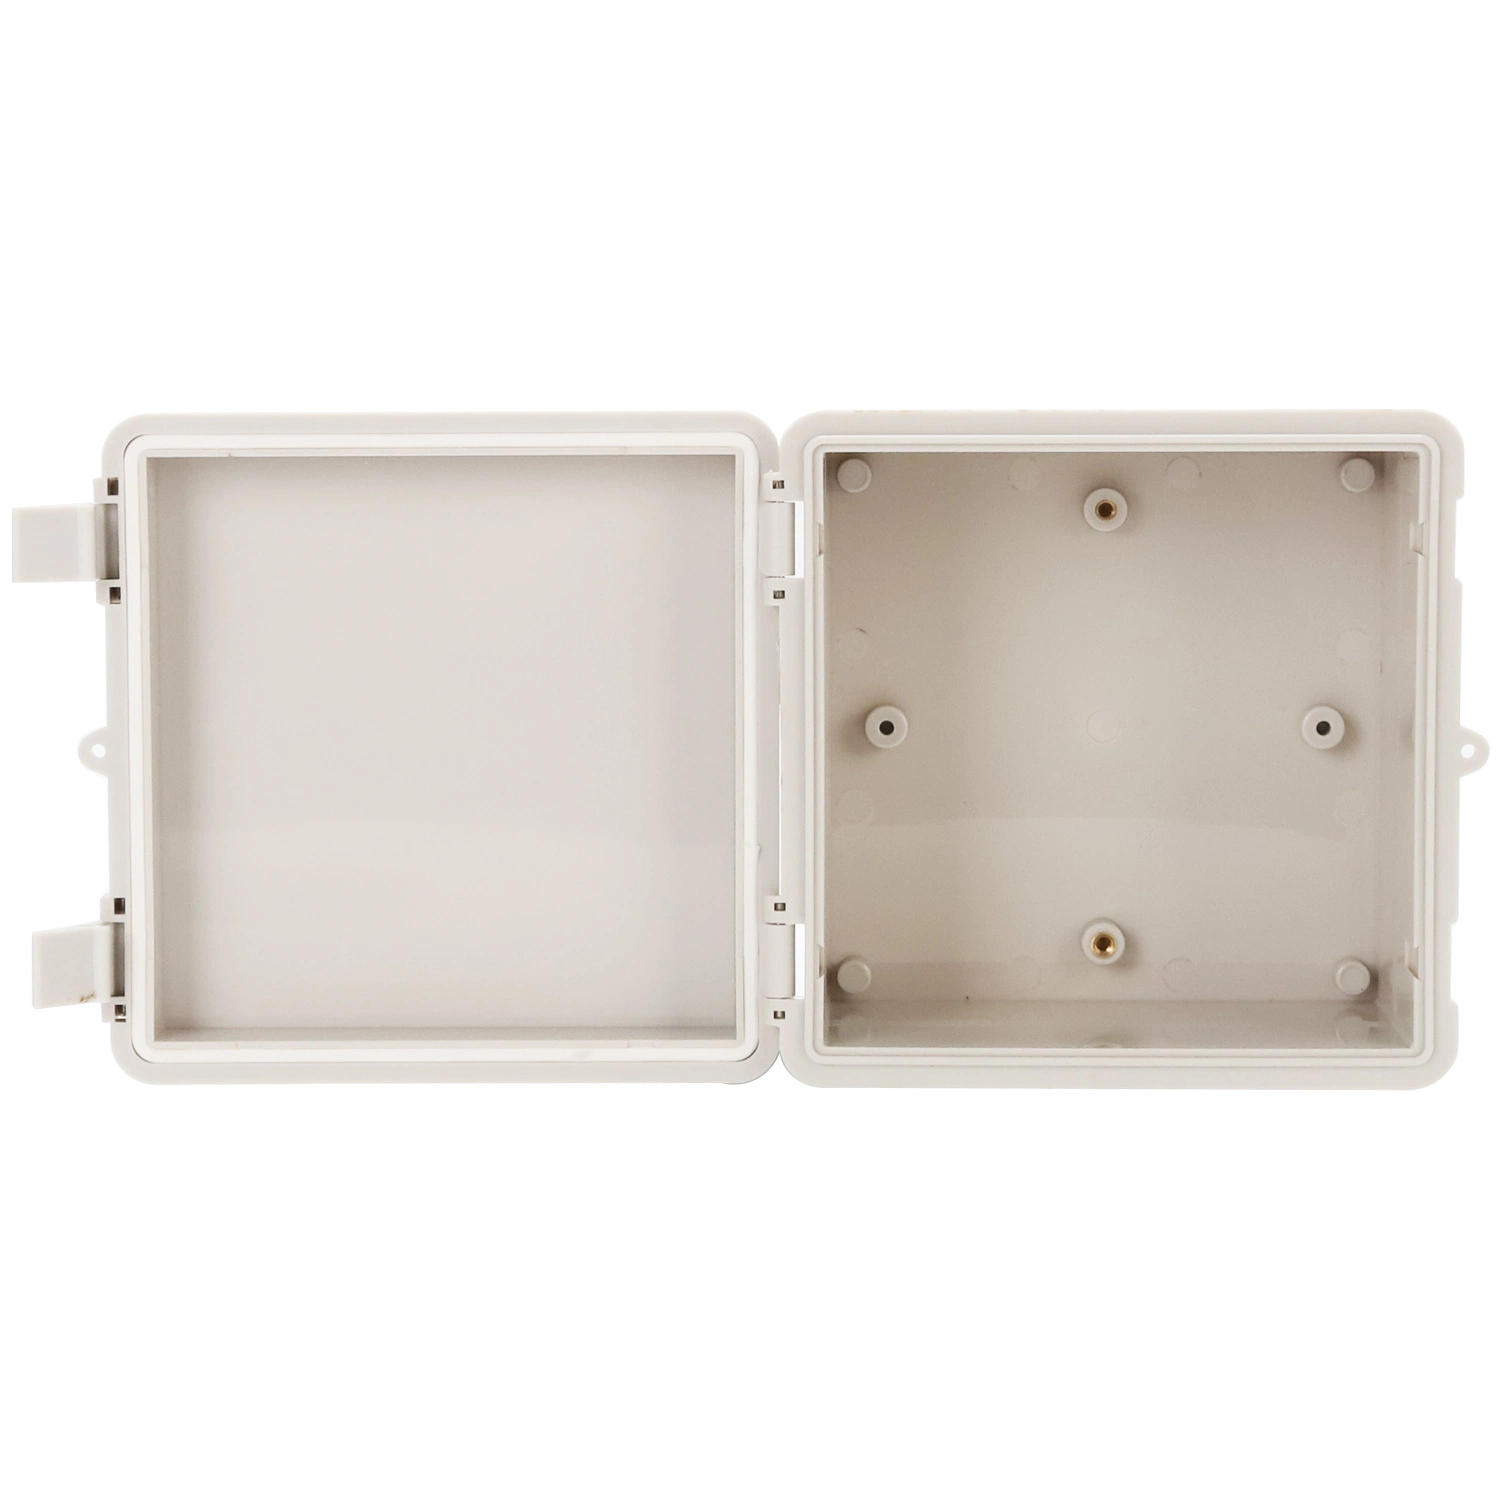 Grey Plastic Cover 150*150*90mm ABS IP66 5.9*5.9*3.5inch Circuit Breakers Protect The Distribution Box